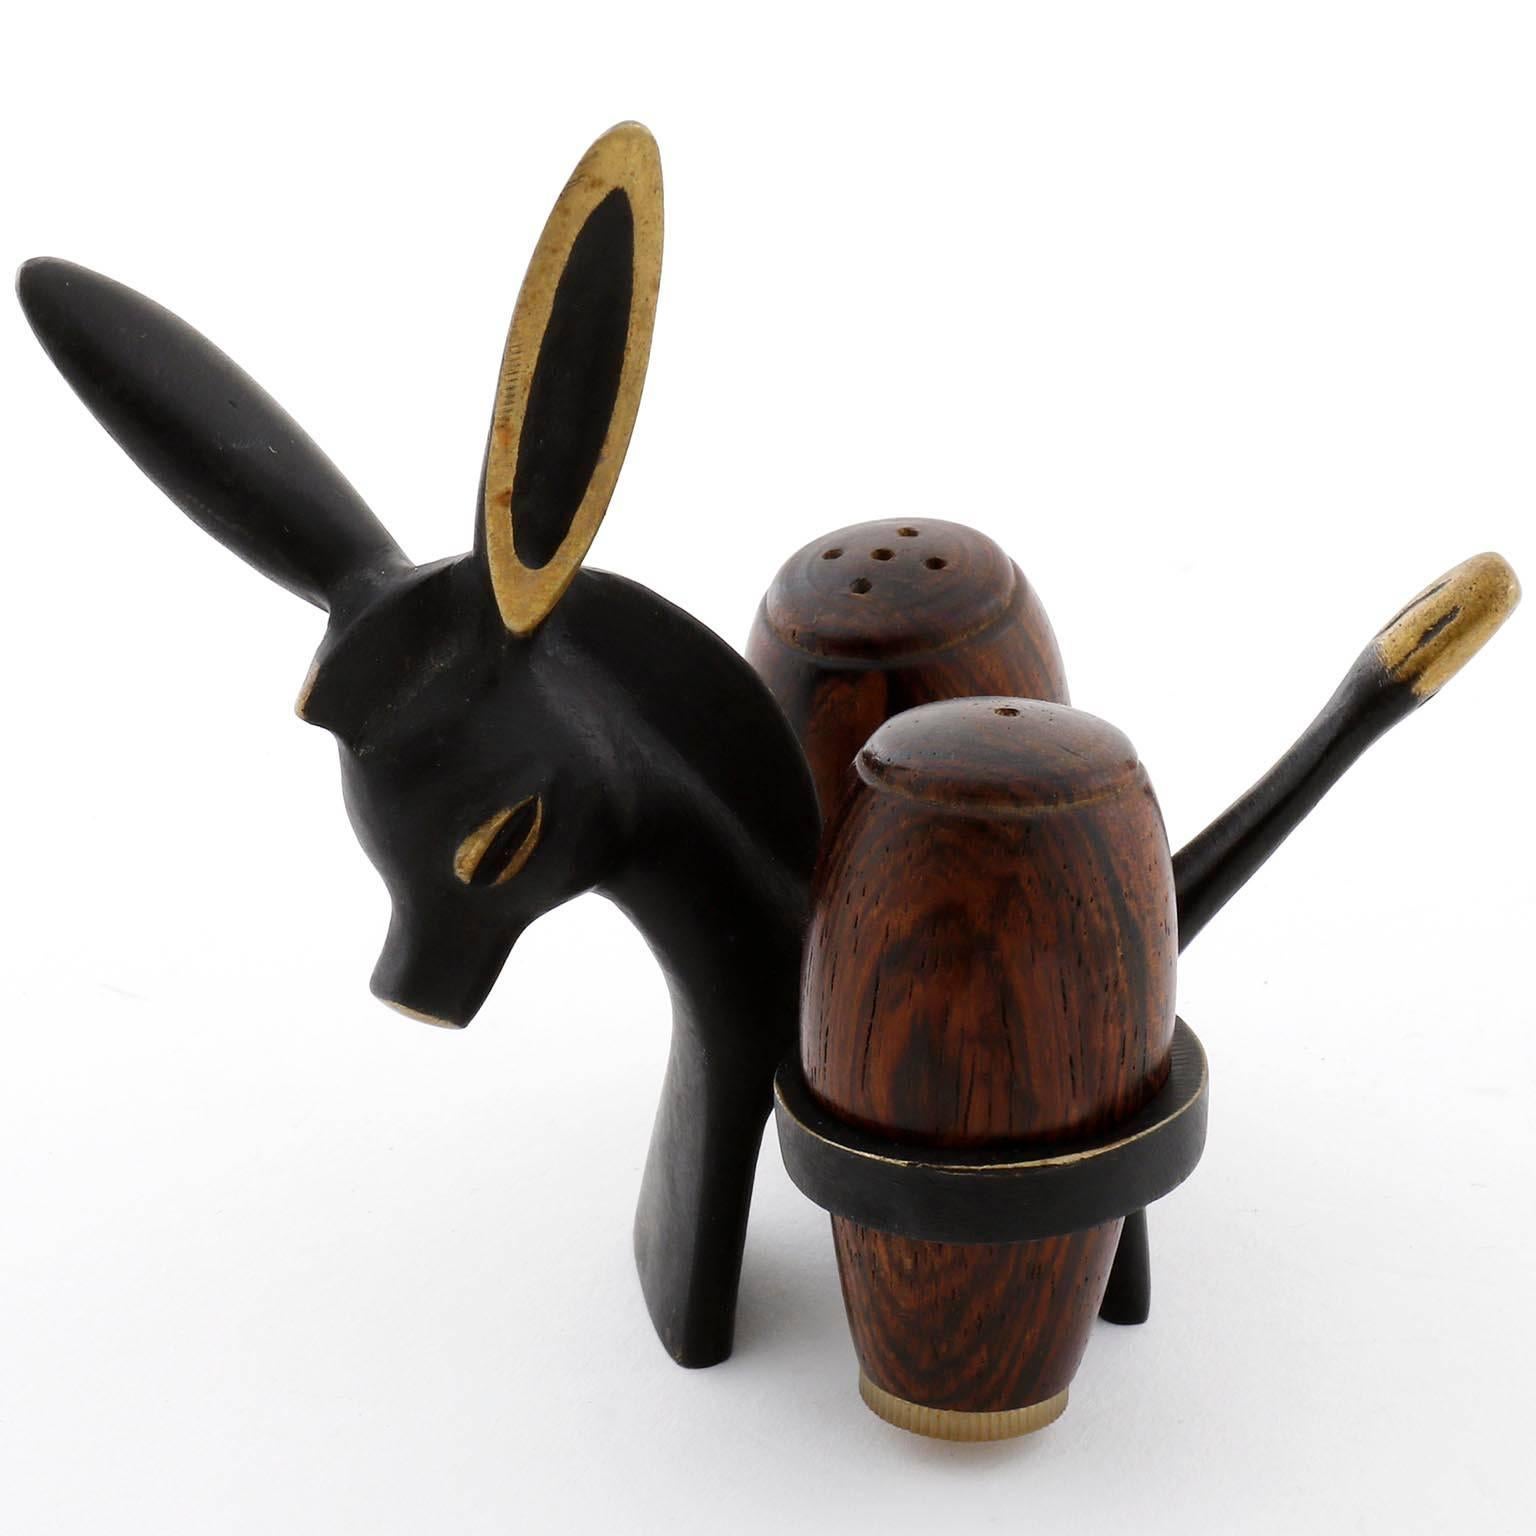 A salt and pepper donkey set designed by Walter Bosse and manufactured by Hertha Baller, Austria, Vienna, in midcentury in 1950s.
The donkey is made of blackened and polished brass. The shakers are made of palisander wood.
Labelled on the